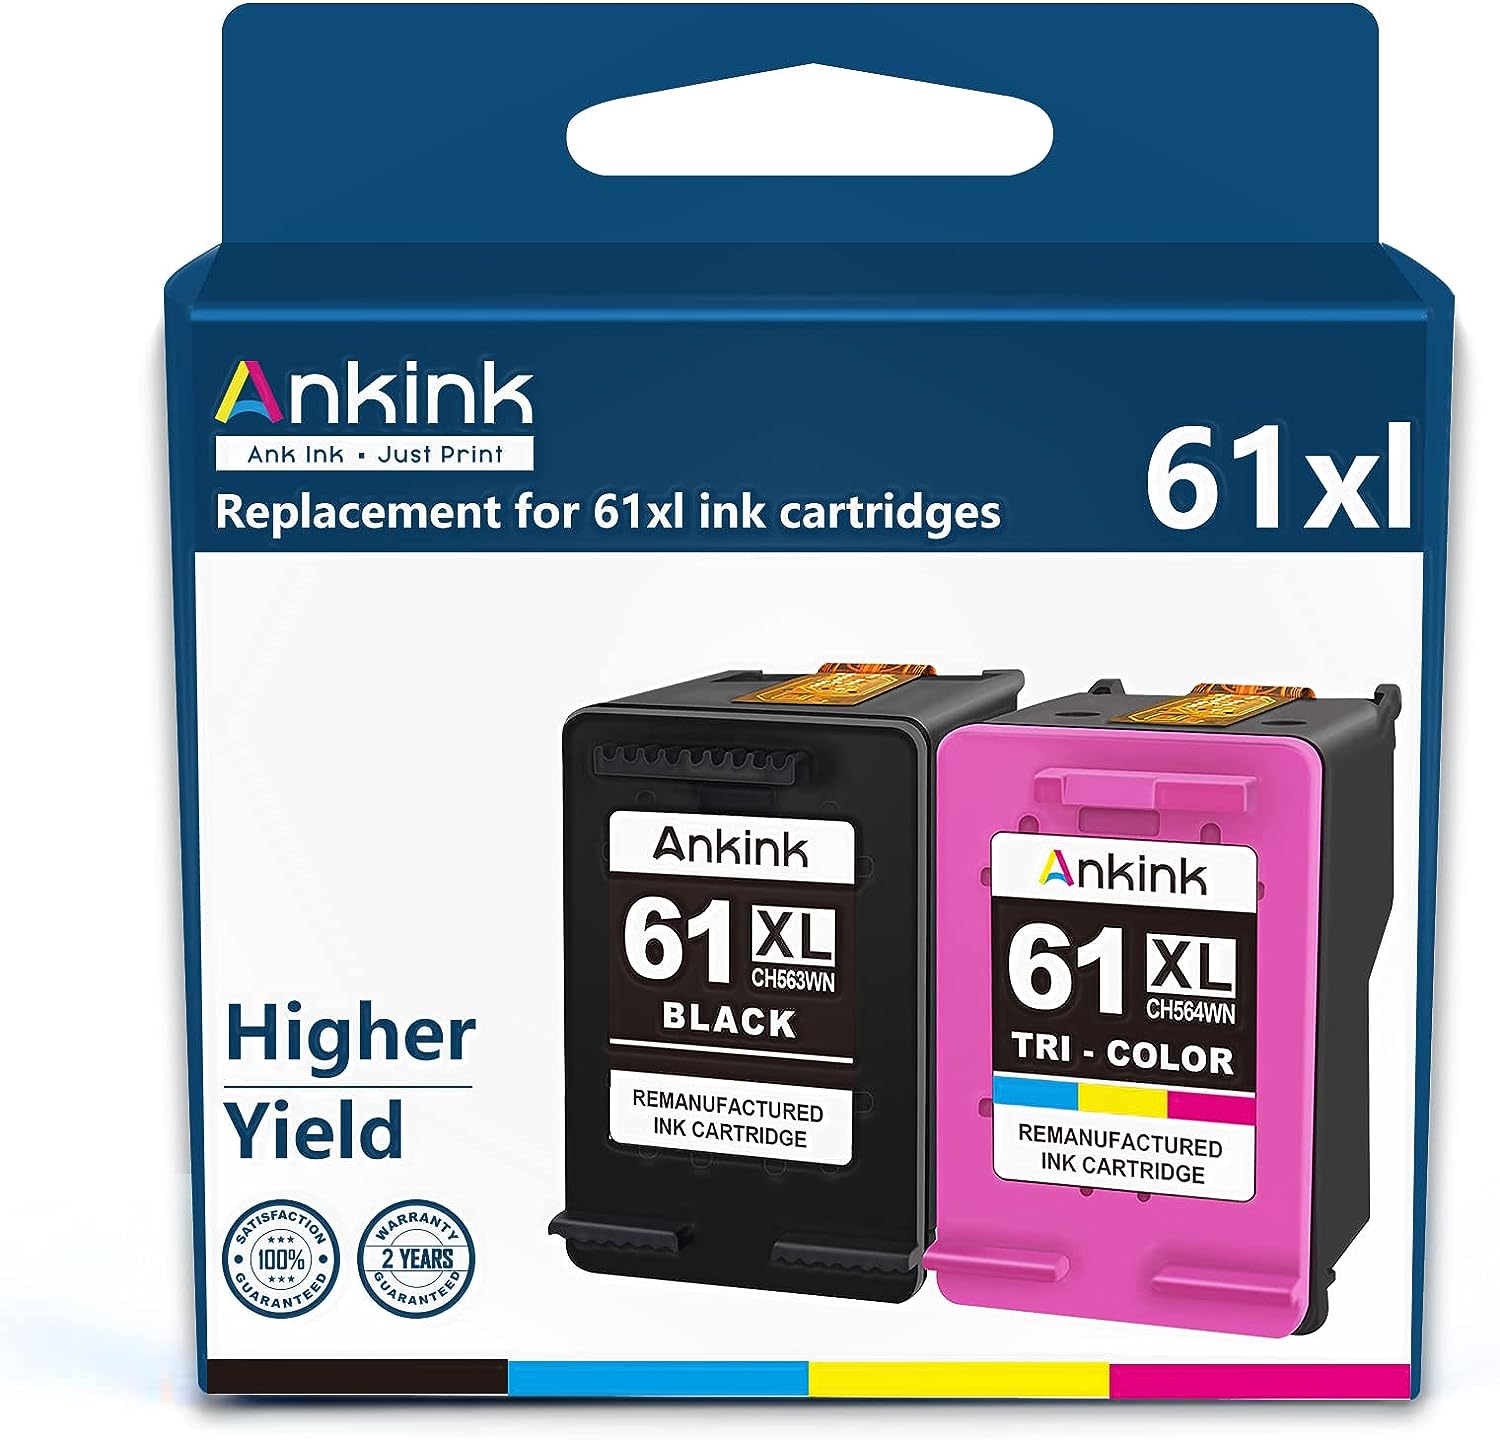 Ankink 61XL Black Color Ink Cartridge Combo Pack [...]